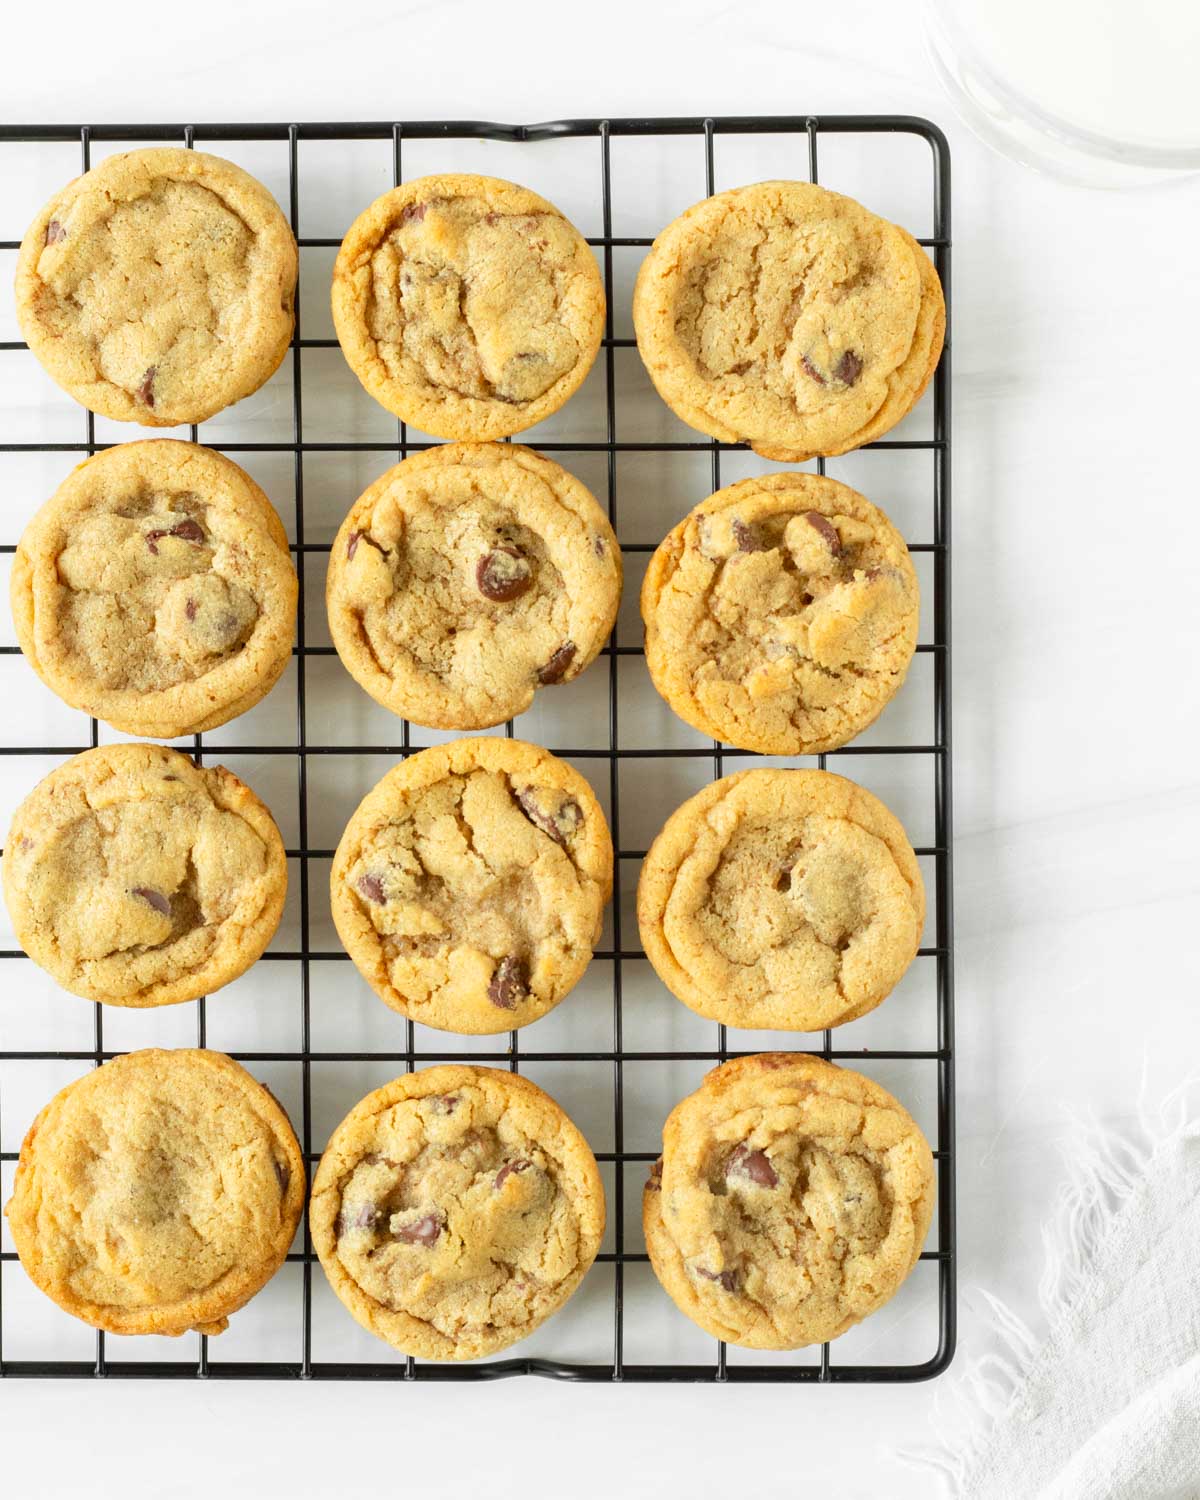 These gluten-free chocolate chip cookies are the best soft and chewy gluten-free cookies made with a gluten-free 1:1 flour blend and other pantry-staple ingredients for a delicious, classic chocolate chip cookie.